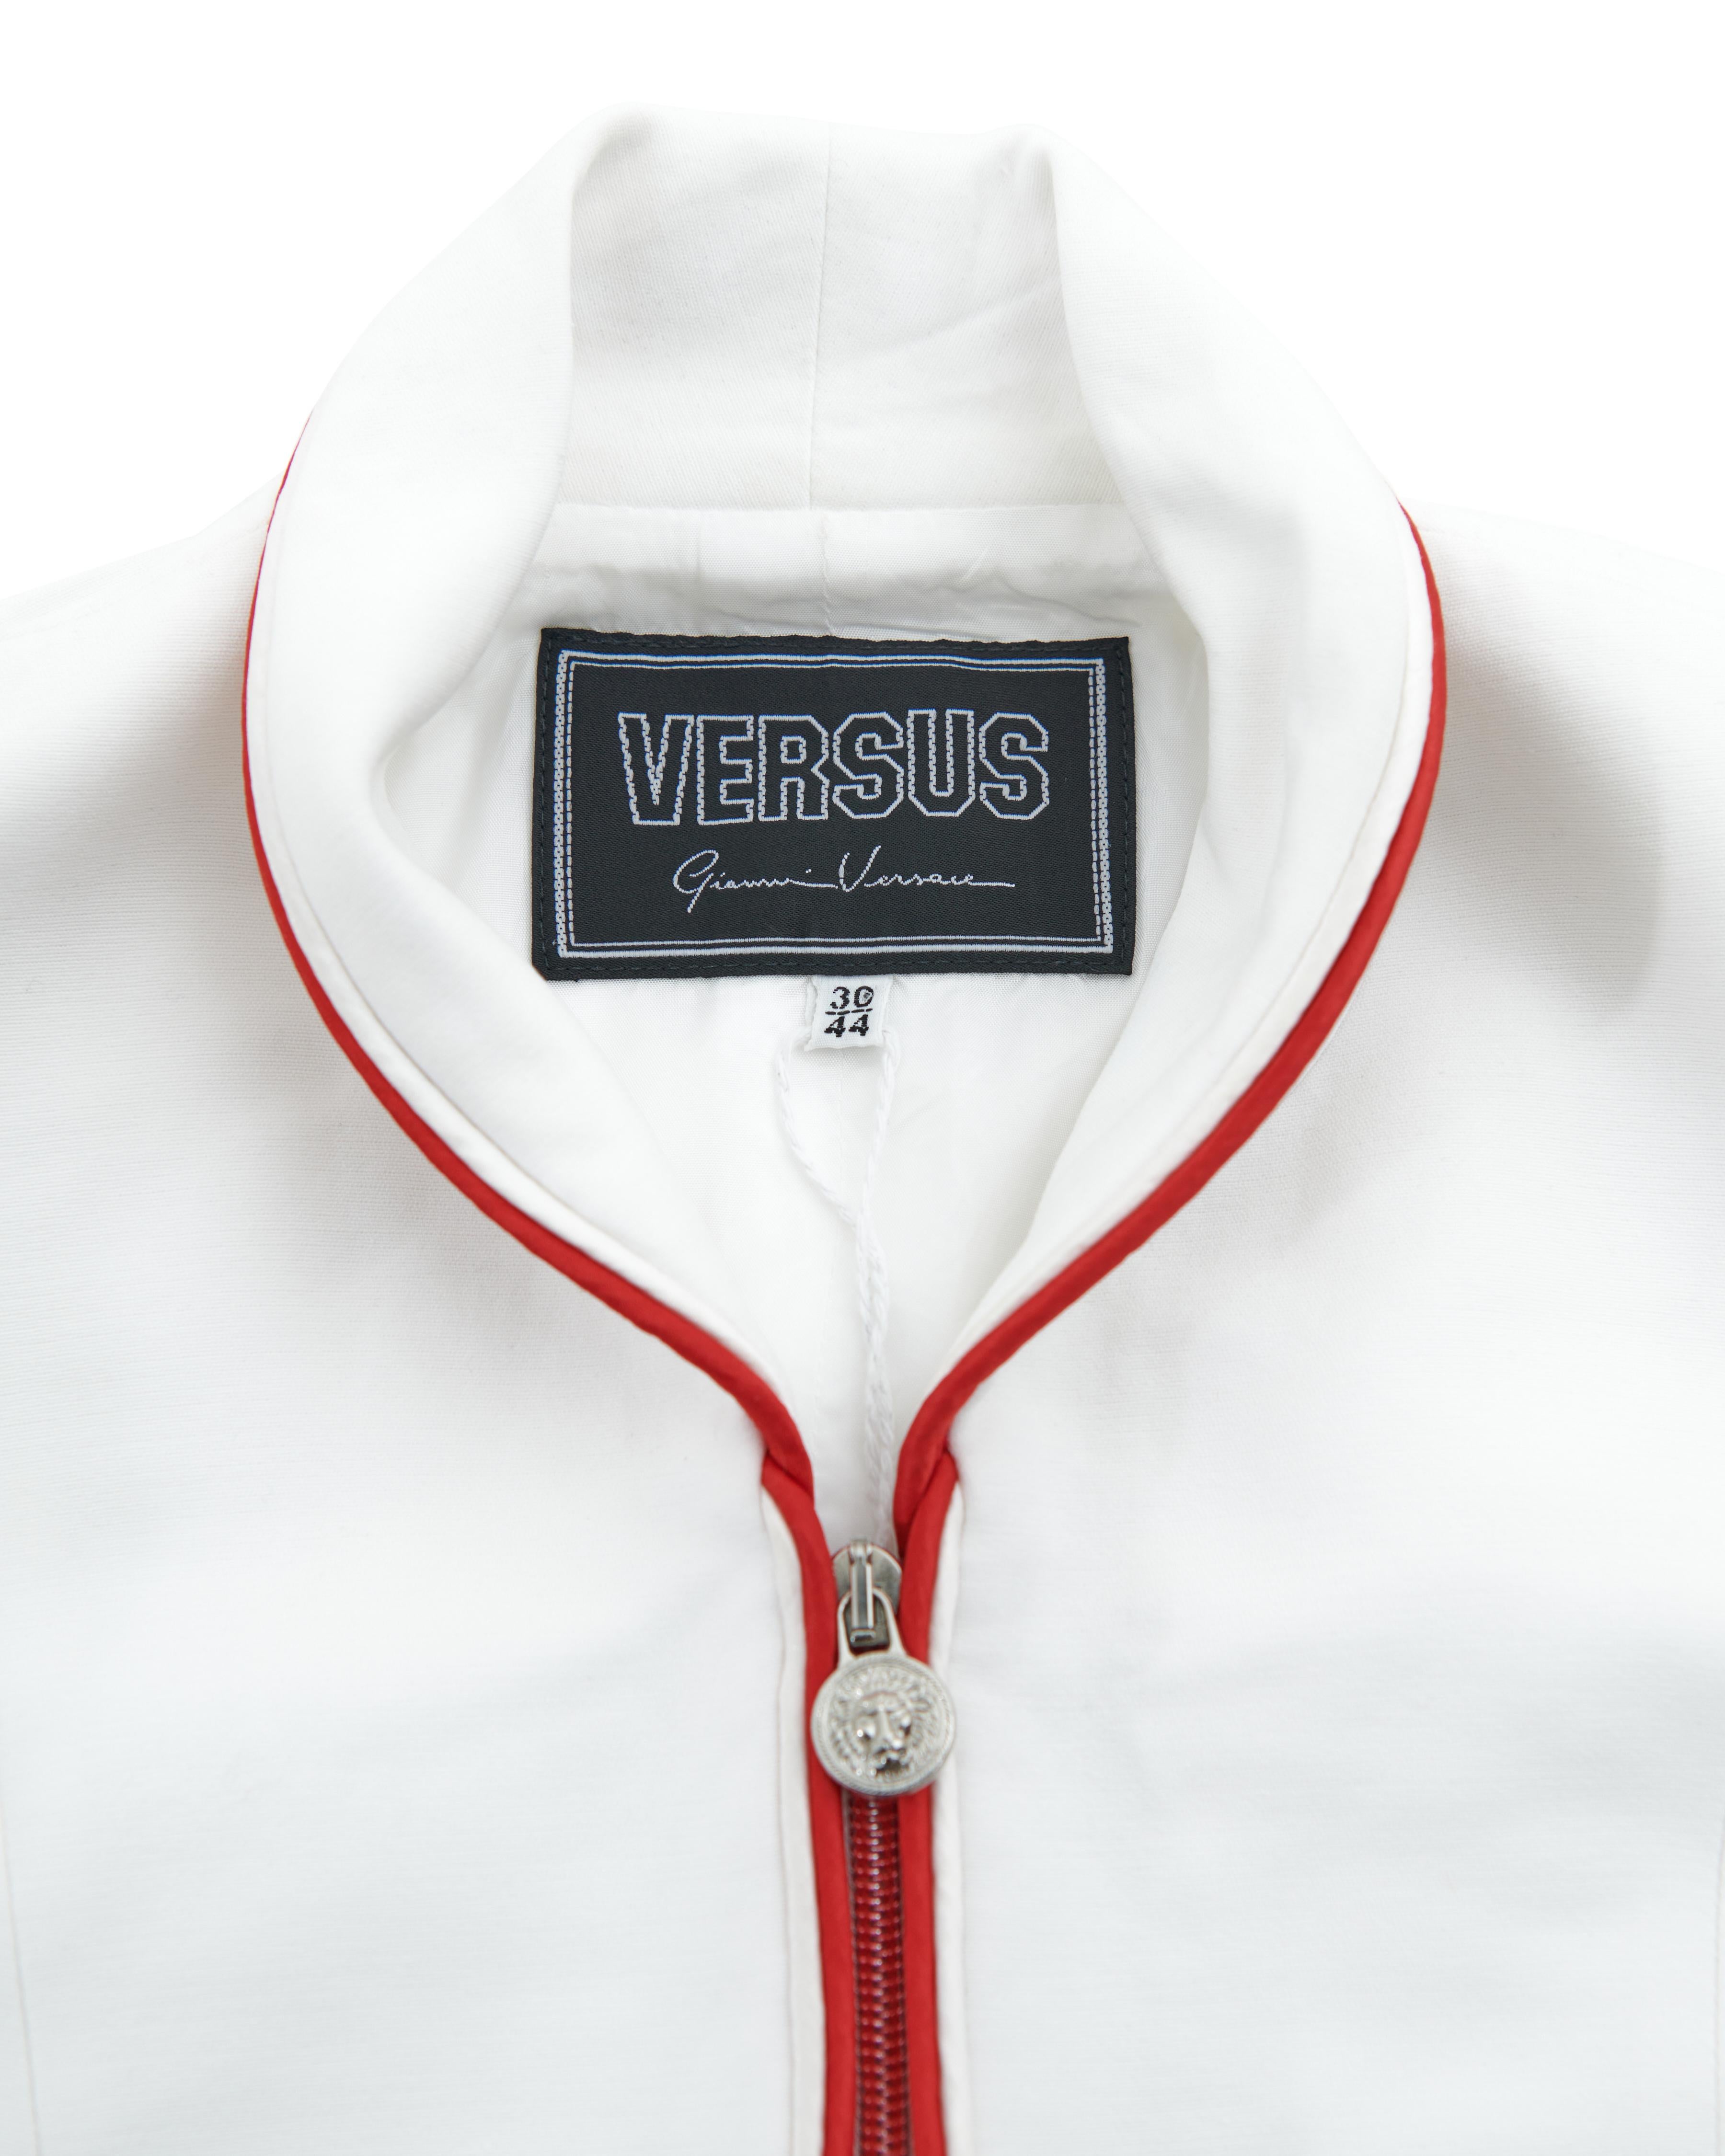 Versus by Gianni Versace Early 1990s White cotton dress and crop jacket set 2